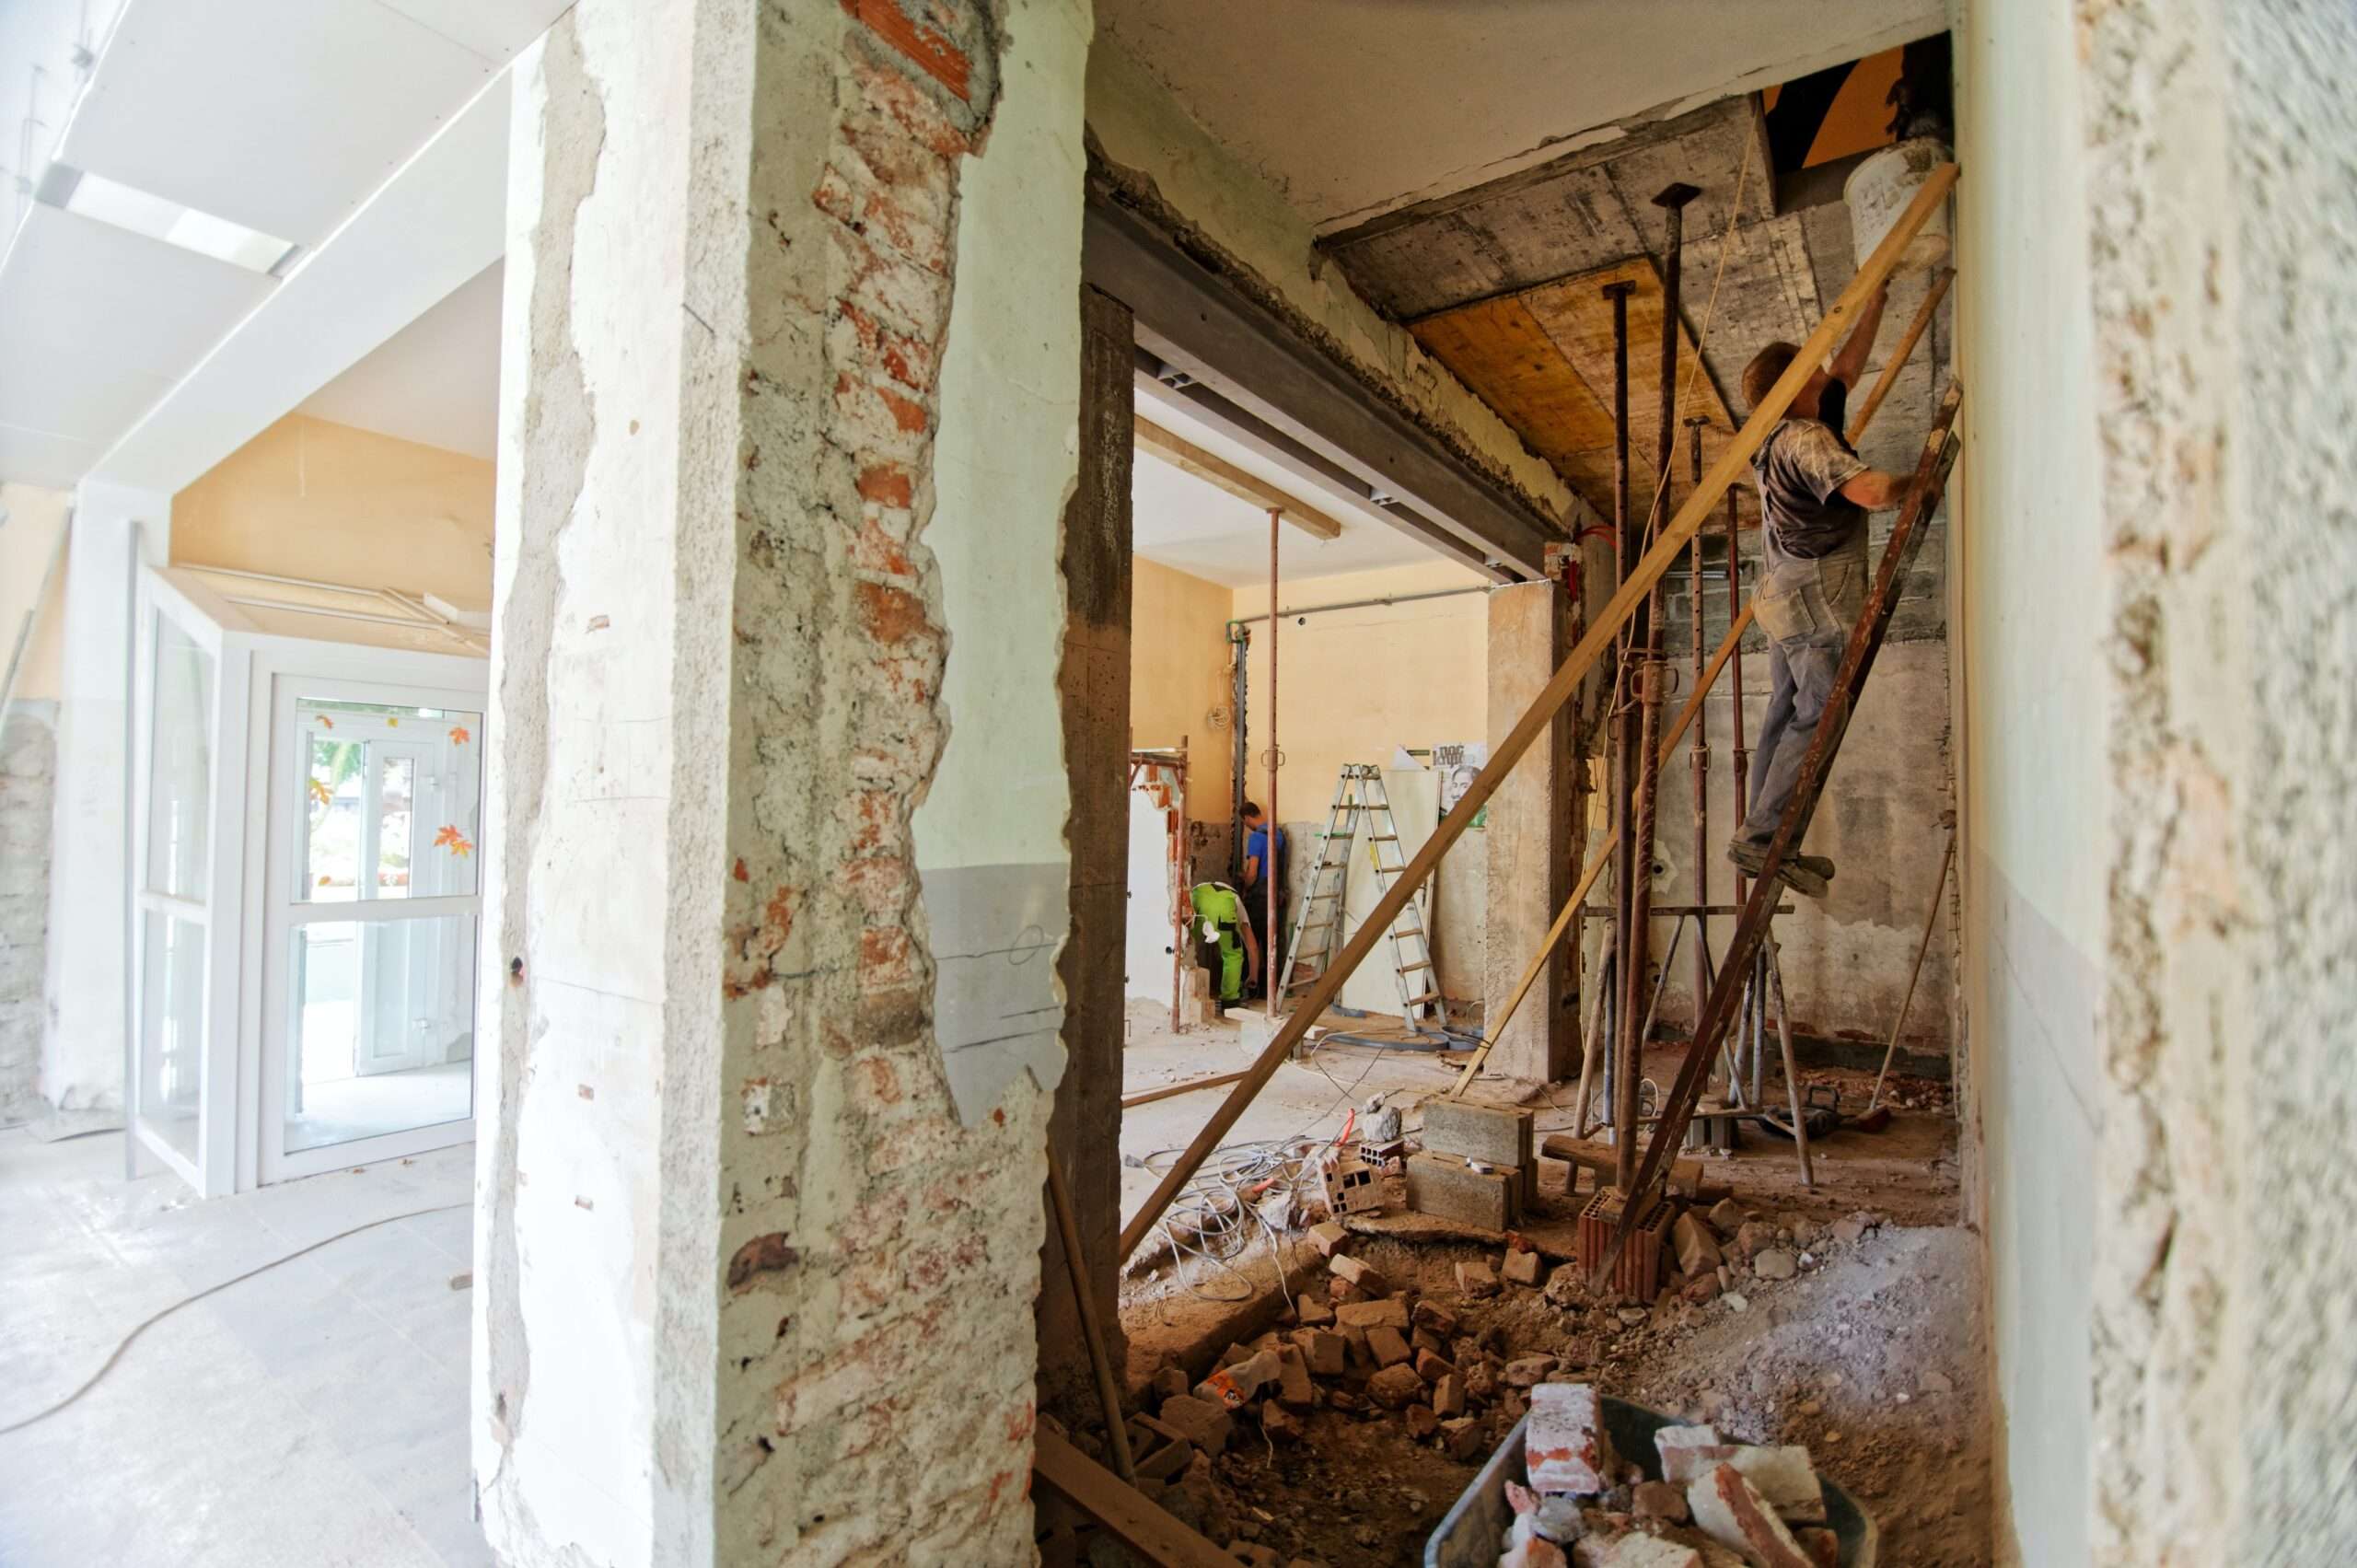 Bathroom Demolition: Not as Easy as It Sounds